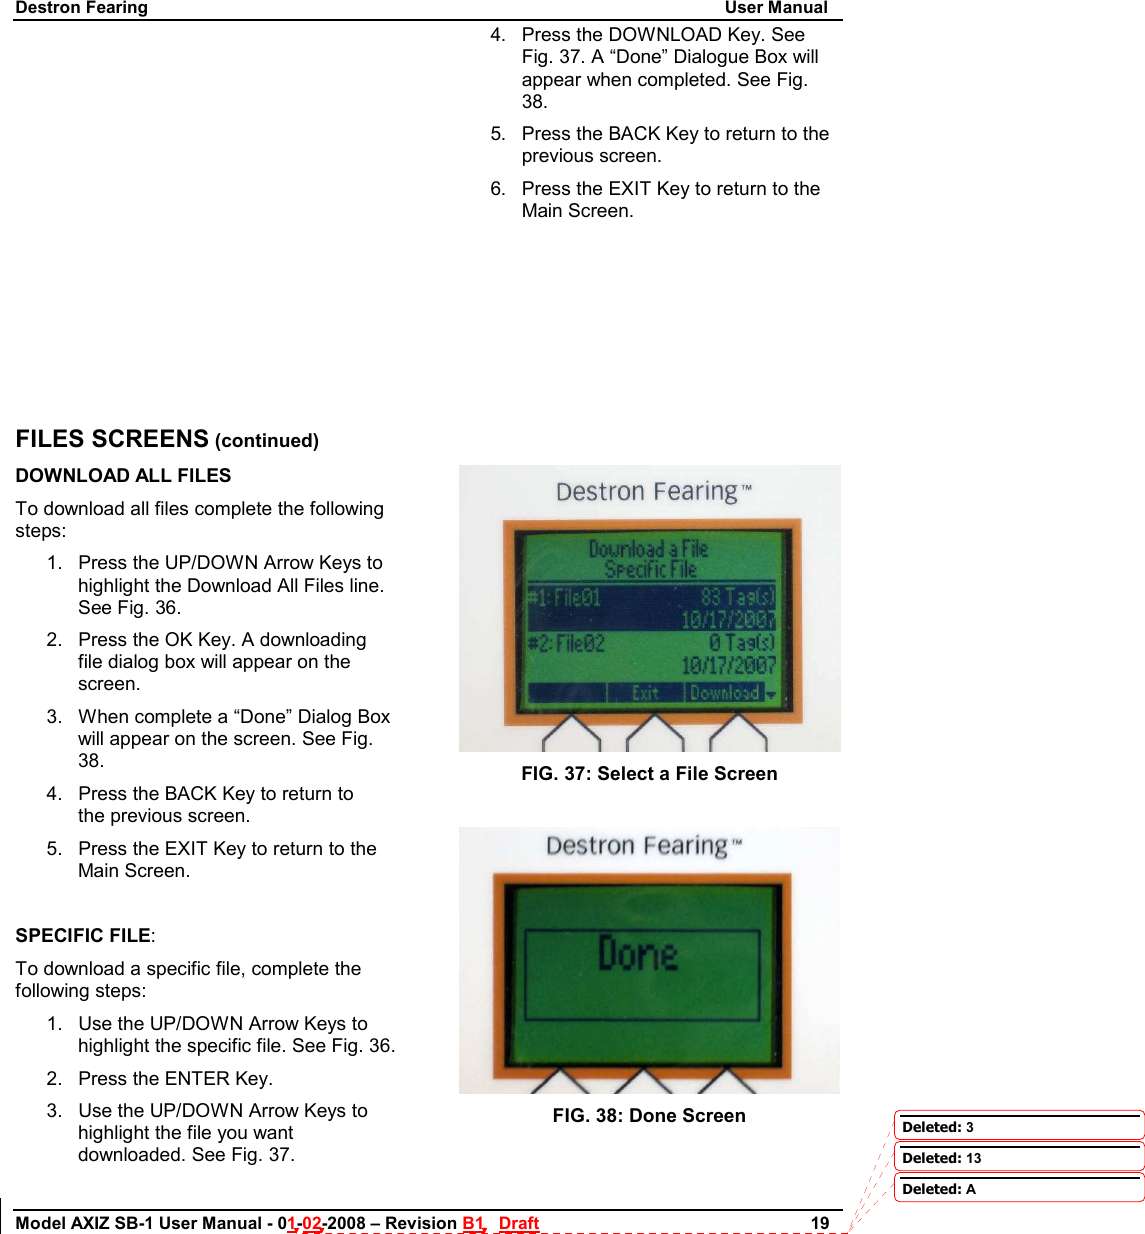 Destron Fearing                                                                                                                        User Manual Model AXIZ SB-1 User Manual - 01-02-2008 – Revision B1   Draft                        19              FILES SCREENS (continued) DOWNLOAD ALL FILES To download all files complete the following steps: 1.  Press the UP/DOWN Arrow Keys to highlight the Download All Files line. See Fig. 36. 2.  Press the OK Key. A downloading file dialog box will appear on the screen. 3.  When complete a “Done” Dialog Box will appear on the screen. See Fig. 38. 4.  Press the BACK Key to return to             the previous screen. 5.  Press the EXIT Key to return to the Main Screen.  SPECIFIC FILE: To download a specific file, complete the following steps: 1.  Use the UP/DOWN Arrow Keys to highlight the specific file. See Fig. 36. 2.  Press the ENTER Key. 3.  Use the UP/DOWN Arrow Keys to highlight the file you want downloaded. See Fig. 37. 4.  Press the DOWNLOAD Key. See Fig. 37. A “Done” Dialogue Box will appear when completed. See Fig. 38. 5.  Press the BACK Key to return to the             previous screen. 6.  Press the EXIT Key to return to the Main Screen.         FIG. 37: Select a File Screen   FIG. 38: Done Screen  Deleted: 3Deleted: 13Deleted: A